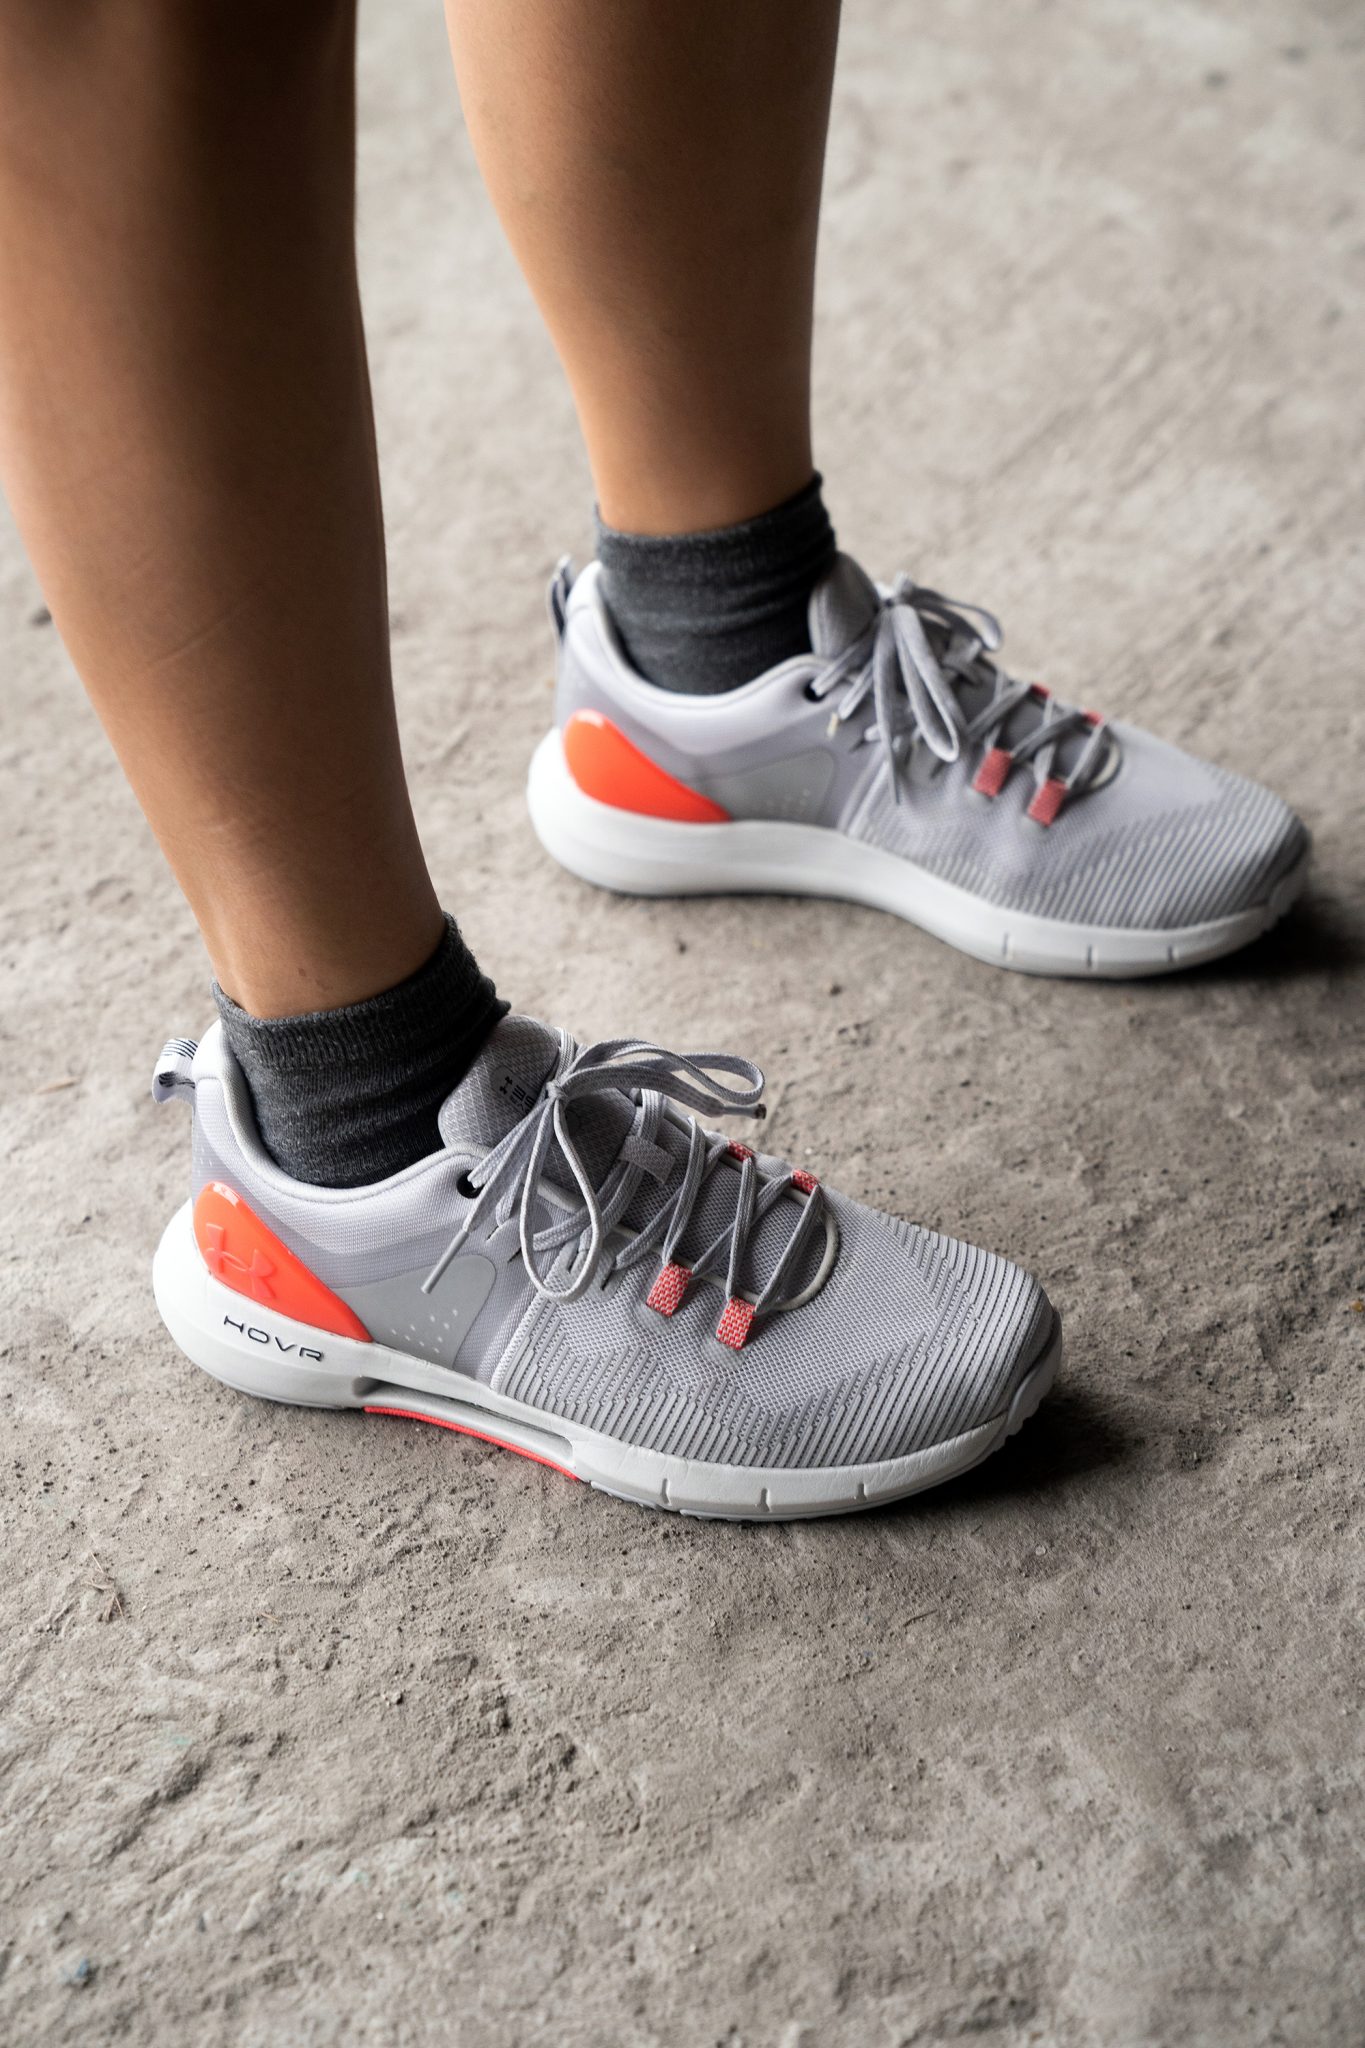 The Halo Gray colorway with a splattering of orange follows the usual Under Armour visual flair